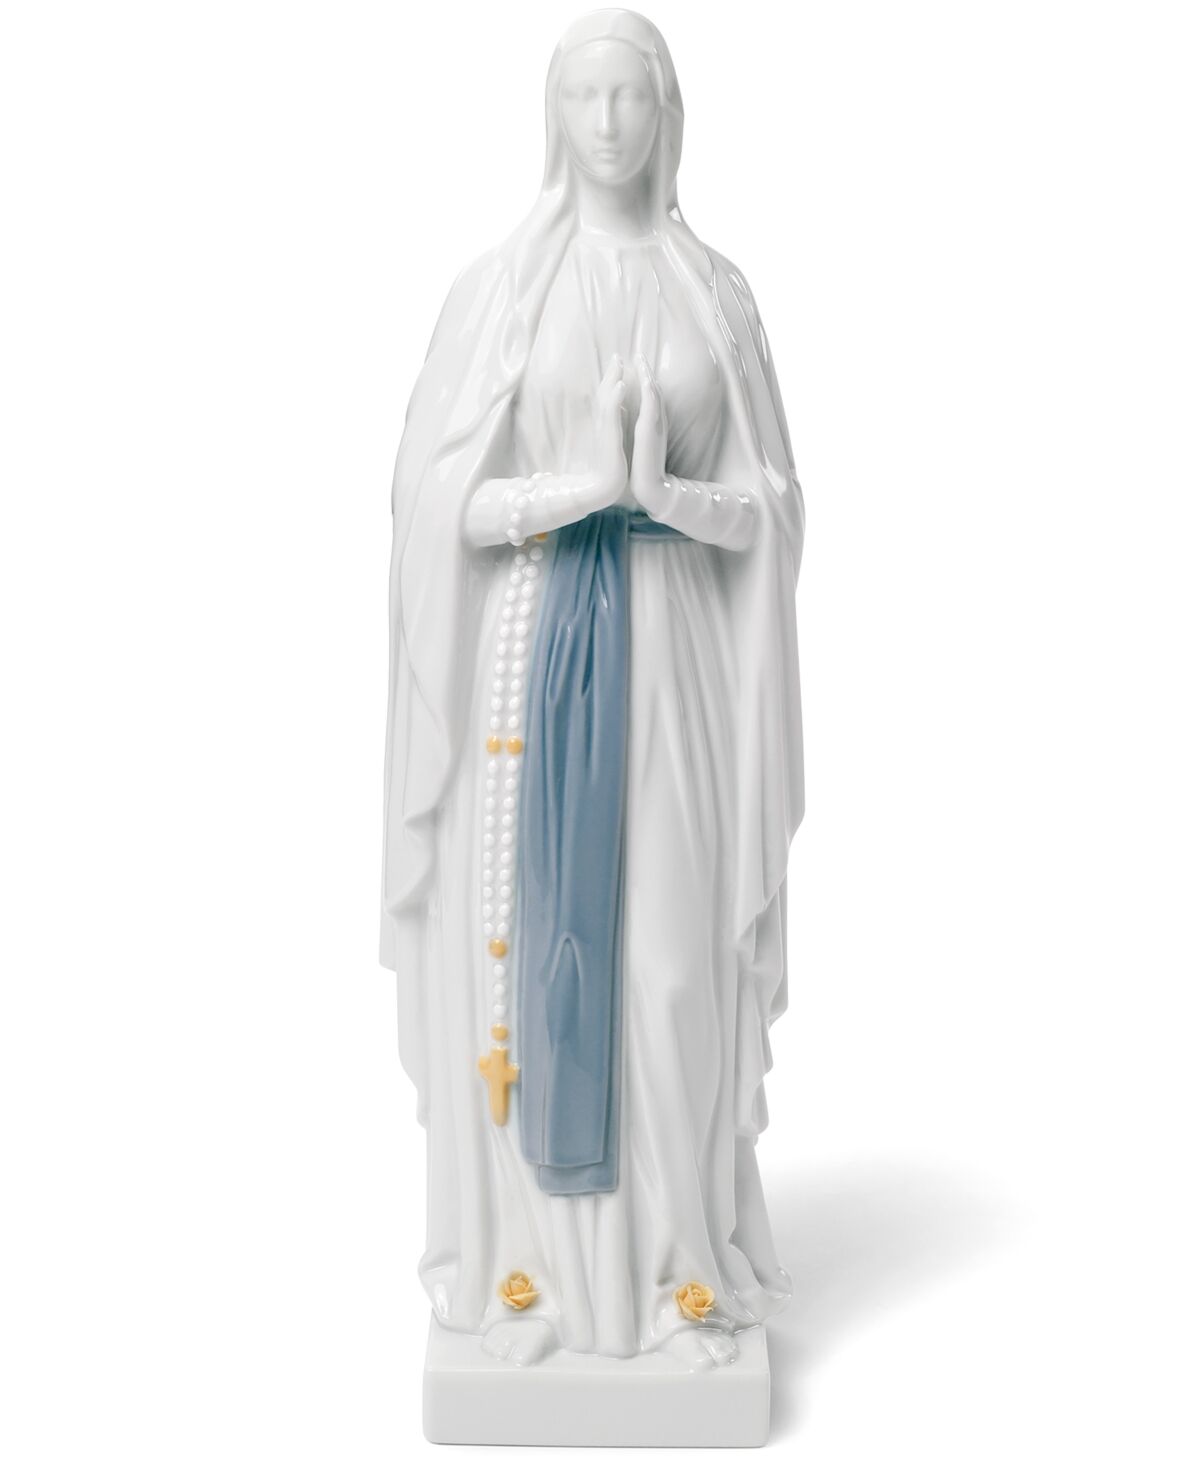 Lladro Collectible Figurine, Our Lady of Lourdes